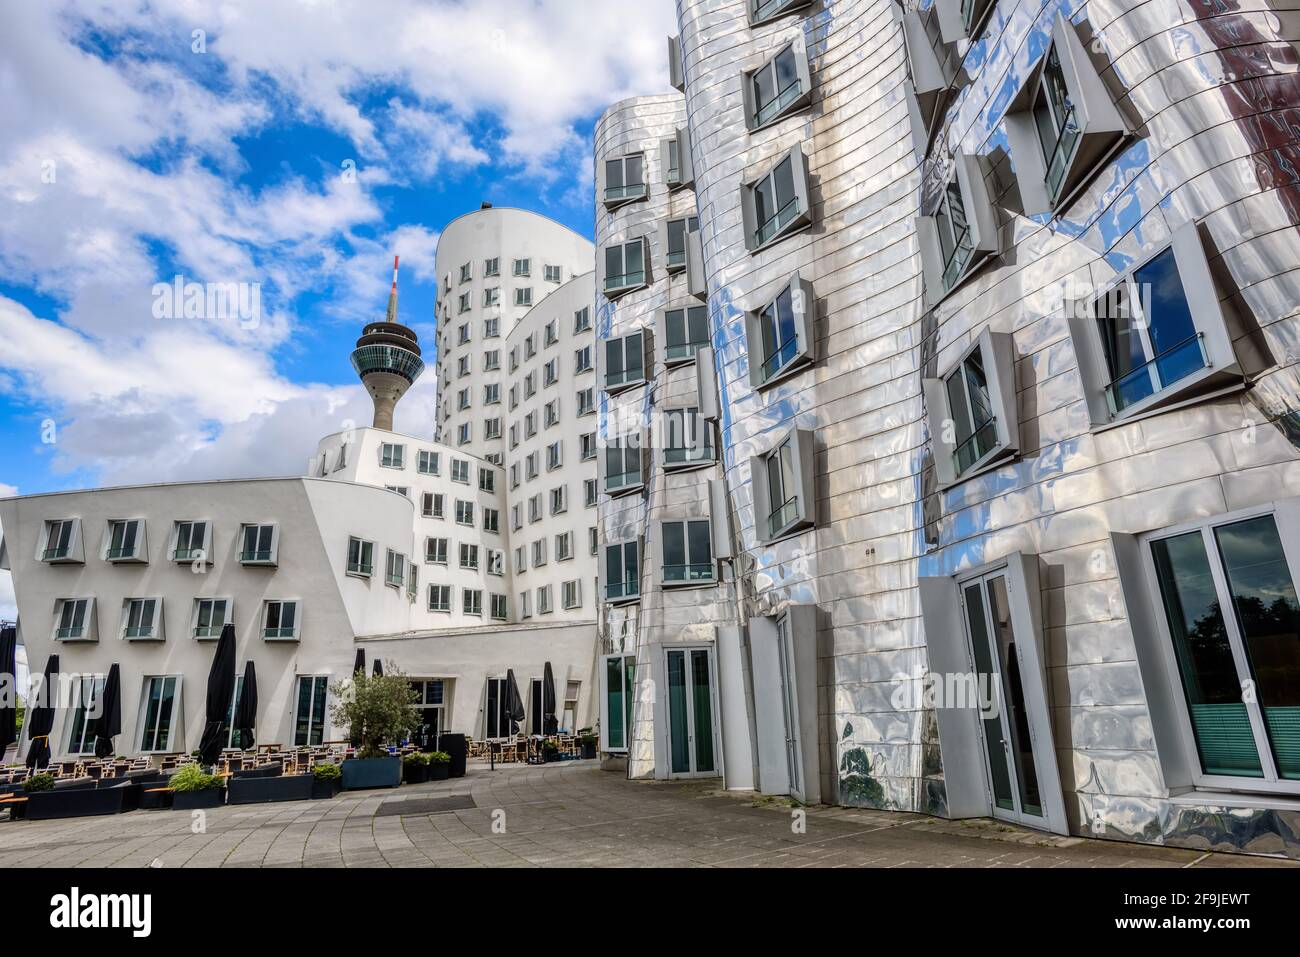 Dusseldorf, Germany - 10 July 2020: Neuer Zollhof buildings in Dusselfdorf Hafen, Germany, the business and lifestyle district of Dusseldorf city famo Stock Photo